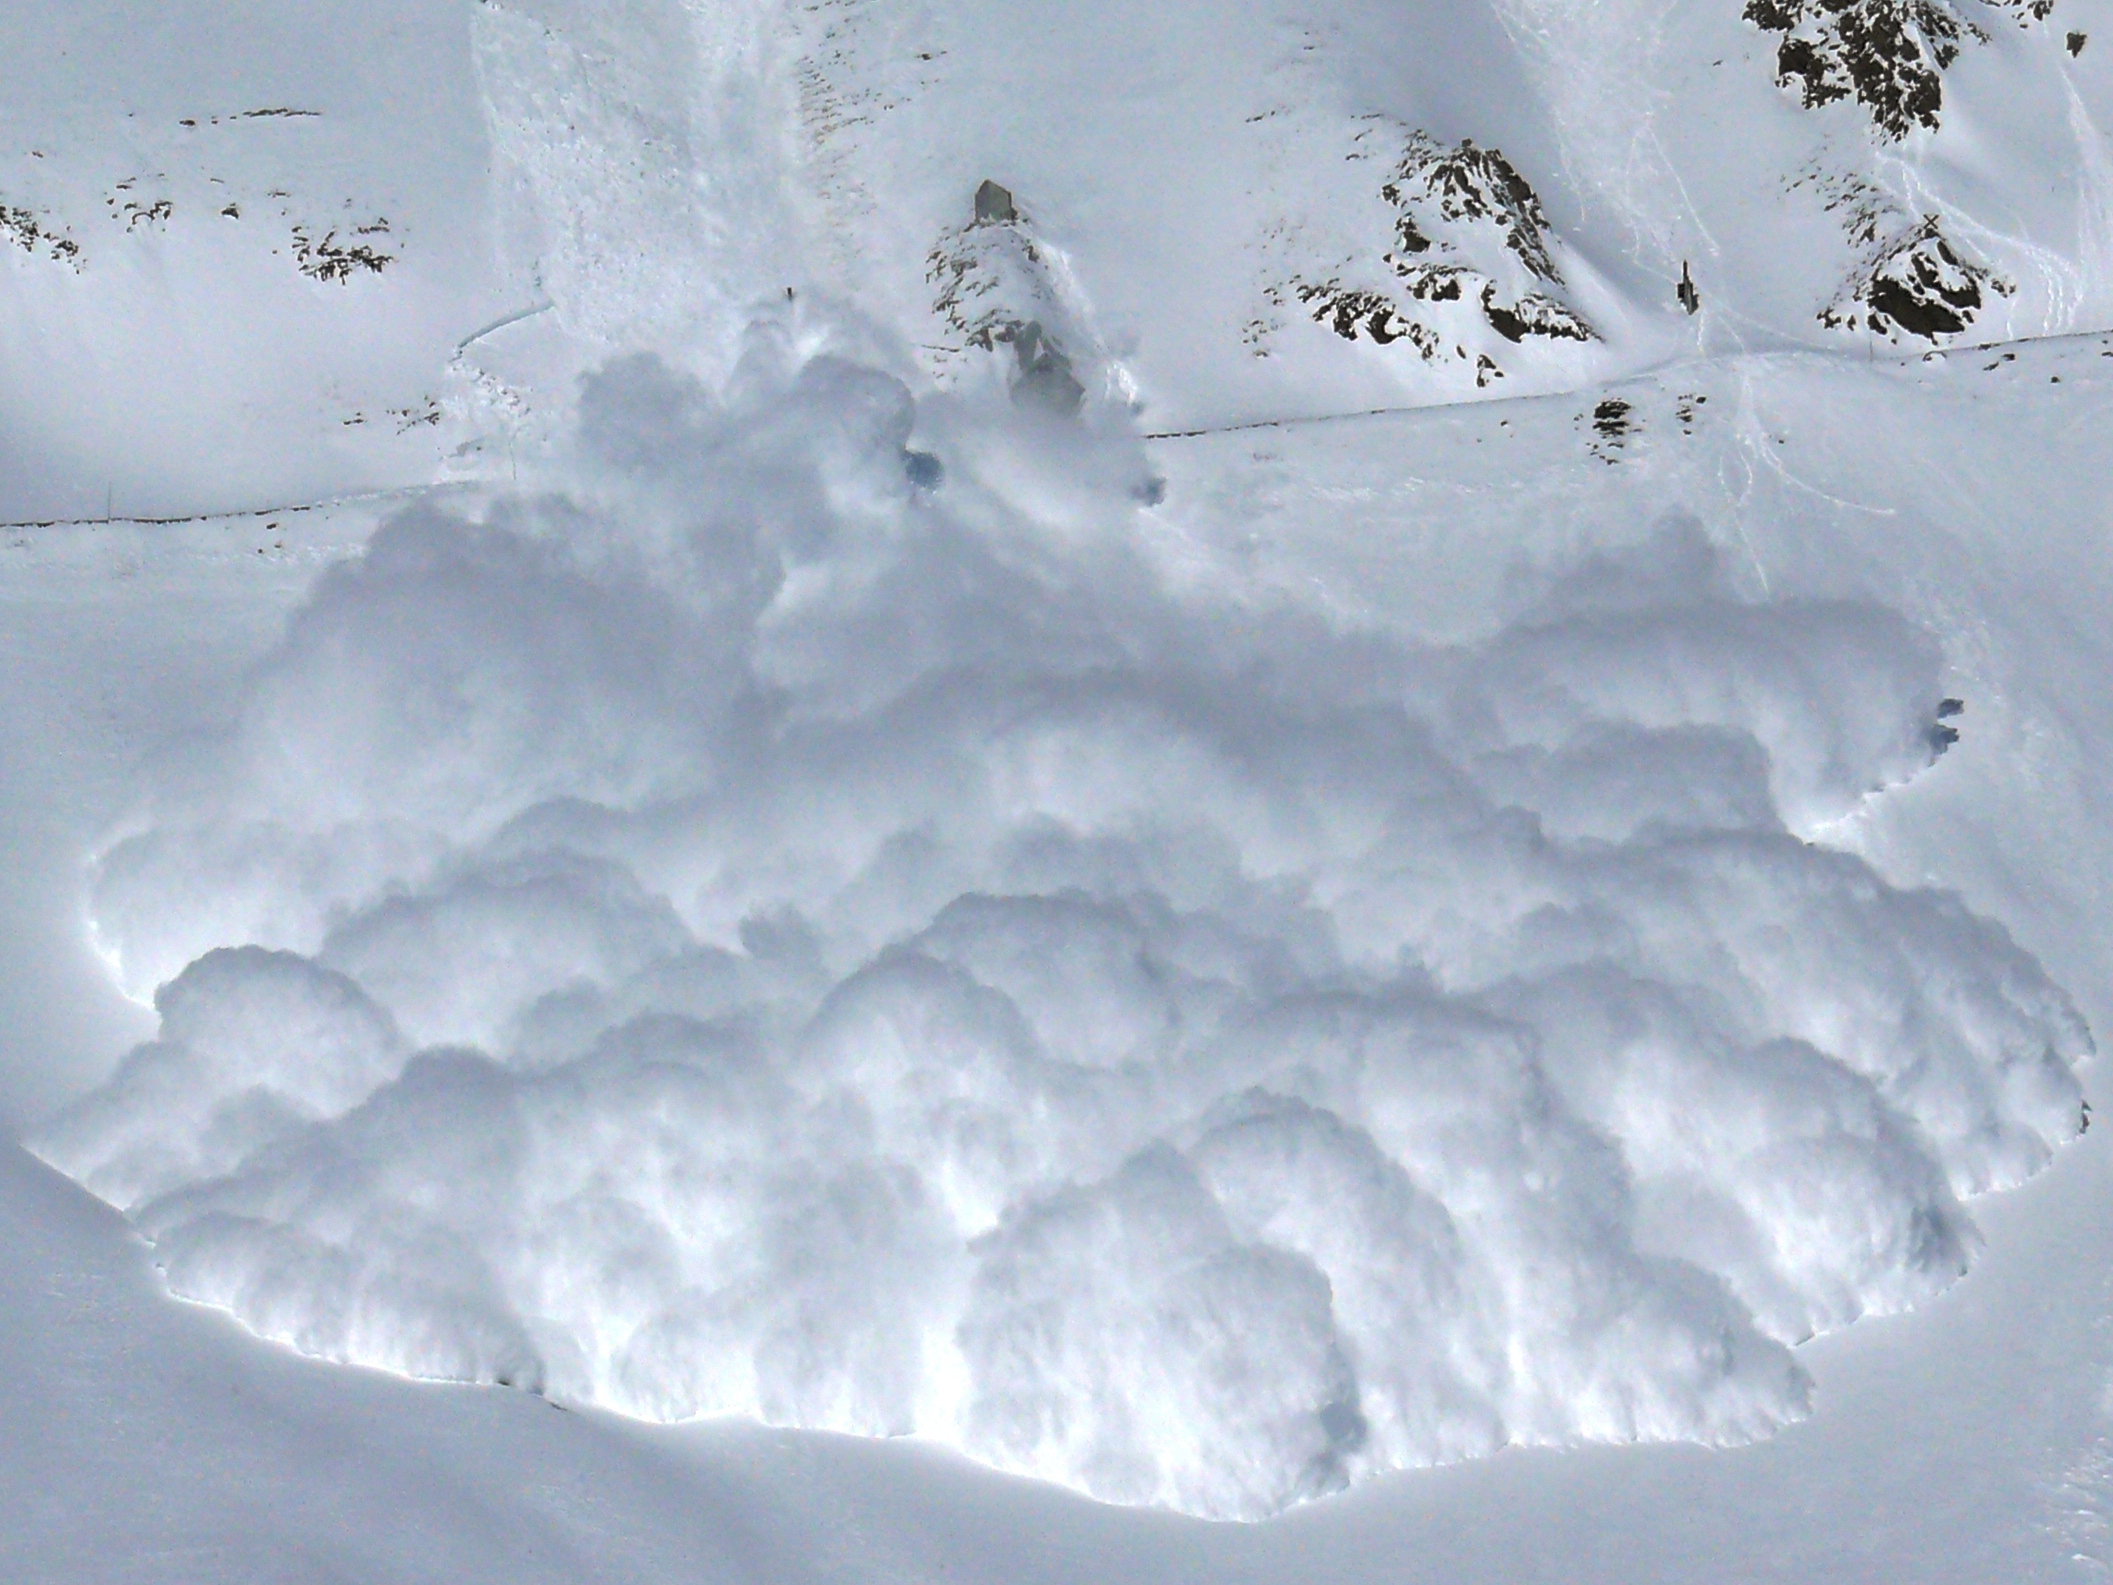 stock image of a powder avalanche.